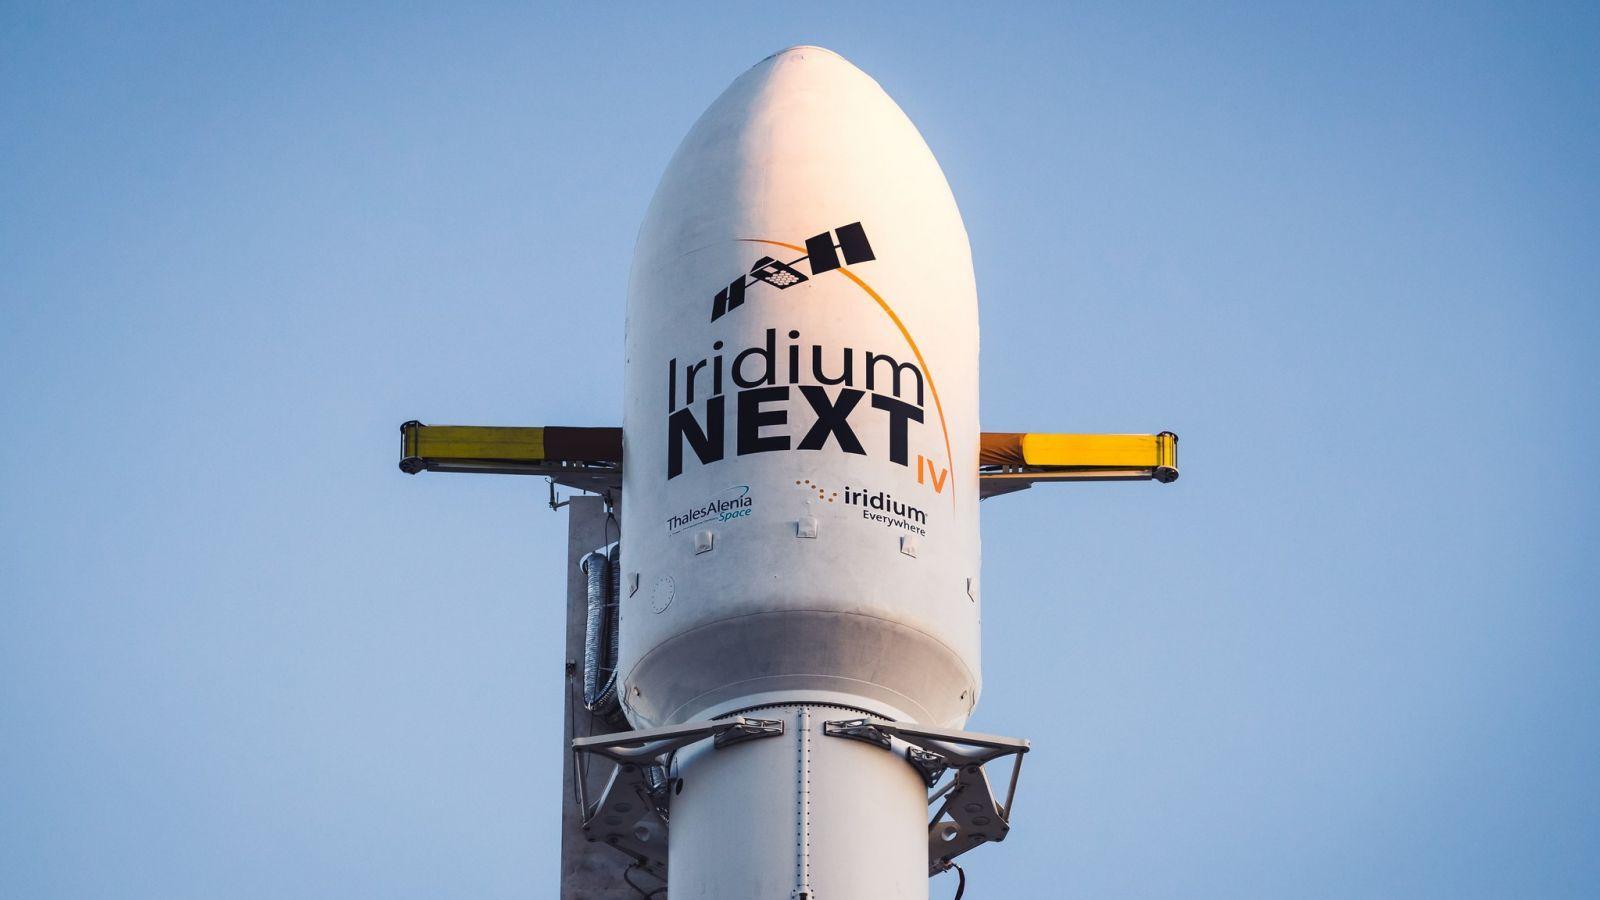 10 Mission SpaceX Logo - SpaceX readies Falcon 9 for launch with 10 Iridium NEXT satellites ...